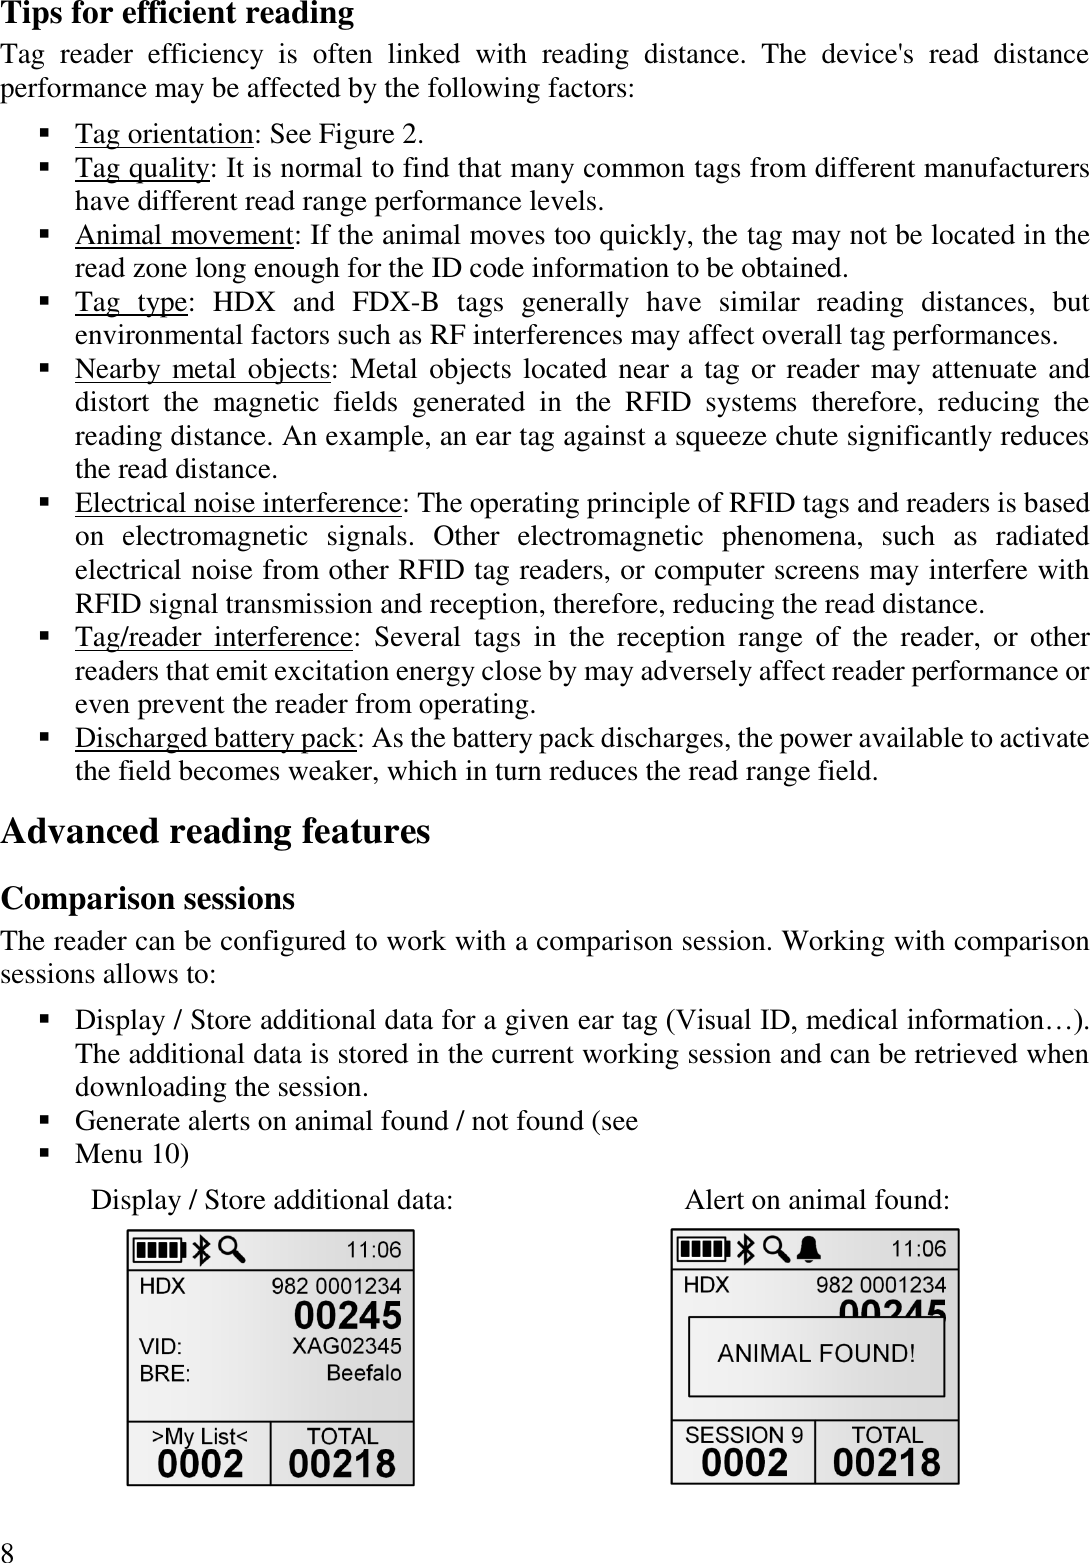 8 Tips for efficient reading Tag  reader  efficiency  is  often  linked  with  reading  distance.  The  device&apos;s  read  distance performance may be affected by the following factors: ▪ Tag orientation: See Figure 2. ▪ Tag quality: It is normal to find that many common tags from different manufacturers have different read range performance levels. ▪ Animal movement: If the animal moves too quickly, the tag may not be located in the read zone long enough for the ID code information to be obtained. ▪ Tag  type:  HDX  and  FDX-B  tags  generally  have  similar  reading  distances,  but environmental factors such as RF interferences may affect overall tag performances. ▪ Nearby metal objects: Metal objects located near a tag or reader may attenuate and distort  the  magnetic  fields  generated  in  the  RFID  systems  therefore,  reducing  the reading distance. An example, an ear tag against a squeeze chute significantly reduces the read distance. ▪ Electrical noise interference: The operating principle of RFID tags and readers is based on  electromagnetic  signals.  Other  electromagnetic  phenomena,  such  as  radiated electrical noise from other RFID tag readers, or computer screens may interfere with RFID signal transmission and reception, therefore, reducing the read distance. ▪ Tag/reader  interference:  Several  tags  in  the  reception  range  of  the  reader,  or  other readers that emit excitation energy close by may adversely affect reader performance or even prevent the reader from operating. ▪ Discharged battery pack: As the battery pack discharges, the power available to activate the field becomes weaker, which in turn reduces the read range field. Advanced reading features Comparison sessions The reader can be configured to work with a comparison session. Working with comparison sessions allows to: ▪ Display / Store additional data for a given ear tag (Visual ID, medical information…). The additional data is stored in the current working session and can be retrieved when downloading the session. ▪ Generate alerts on animal found / not found (see  ▪ Menu 10) Display / Store additional data: Alert on animal found:    